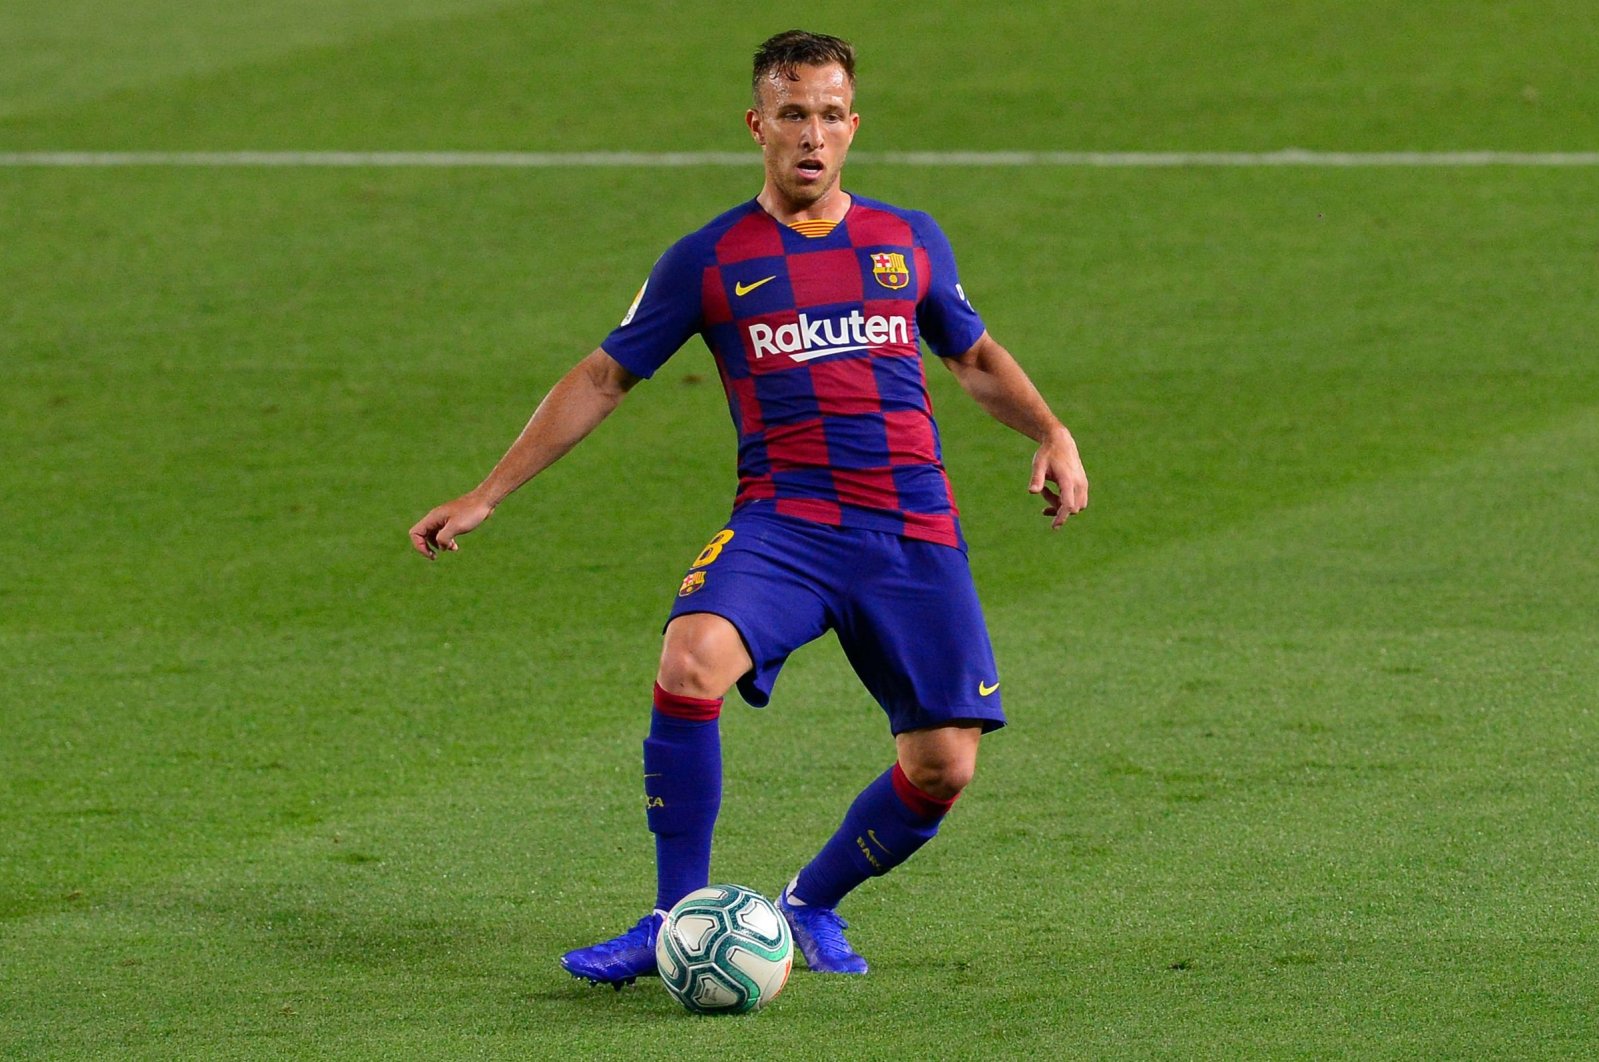 Barcelona's Brazilian midfielder Arthur controls the ball during the Spanish league football match between FC Barcelona and Athletic Club Bilbao at the Camp Nou stadium in Barcelona, Spain, June 23, 2020. (AFP Photo)